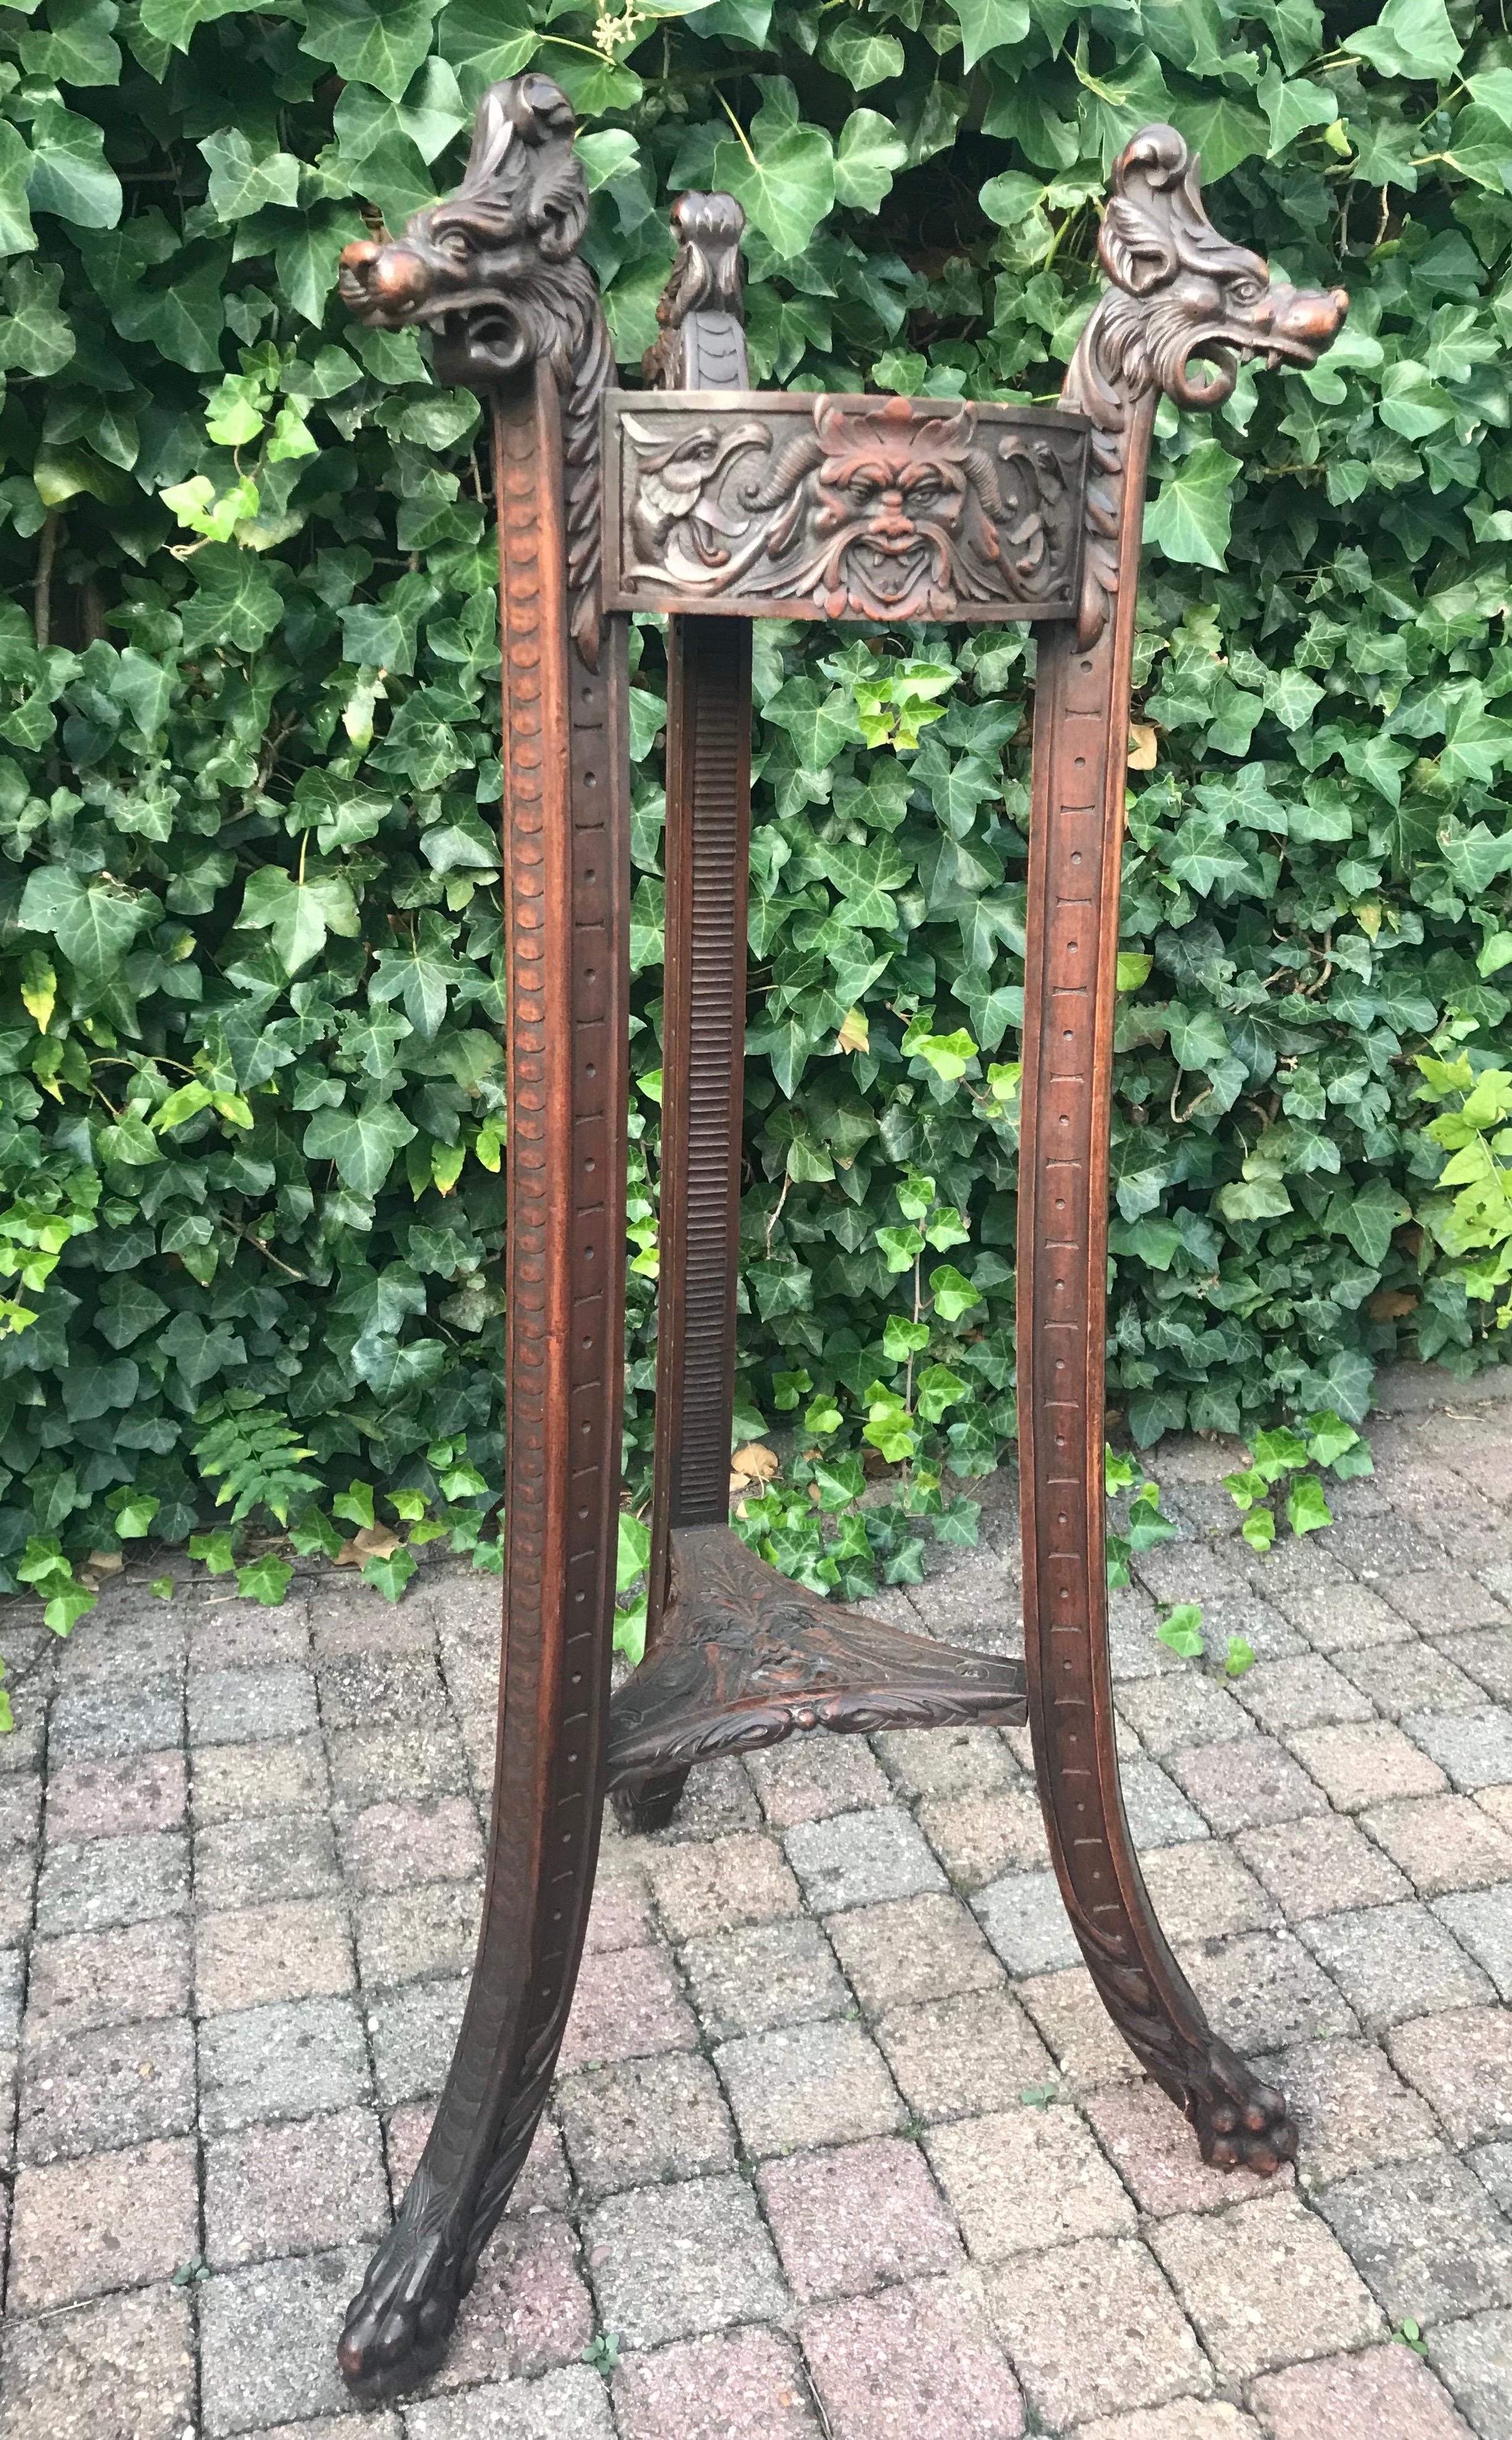 Unique and all handcrafted French planter with a great patina. 

Highly symbolic, stunningly figural and very decorative antique plant stand made by a true artisan. This late 19th or possibly very early 20th century, French jardinière comes with